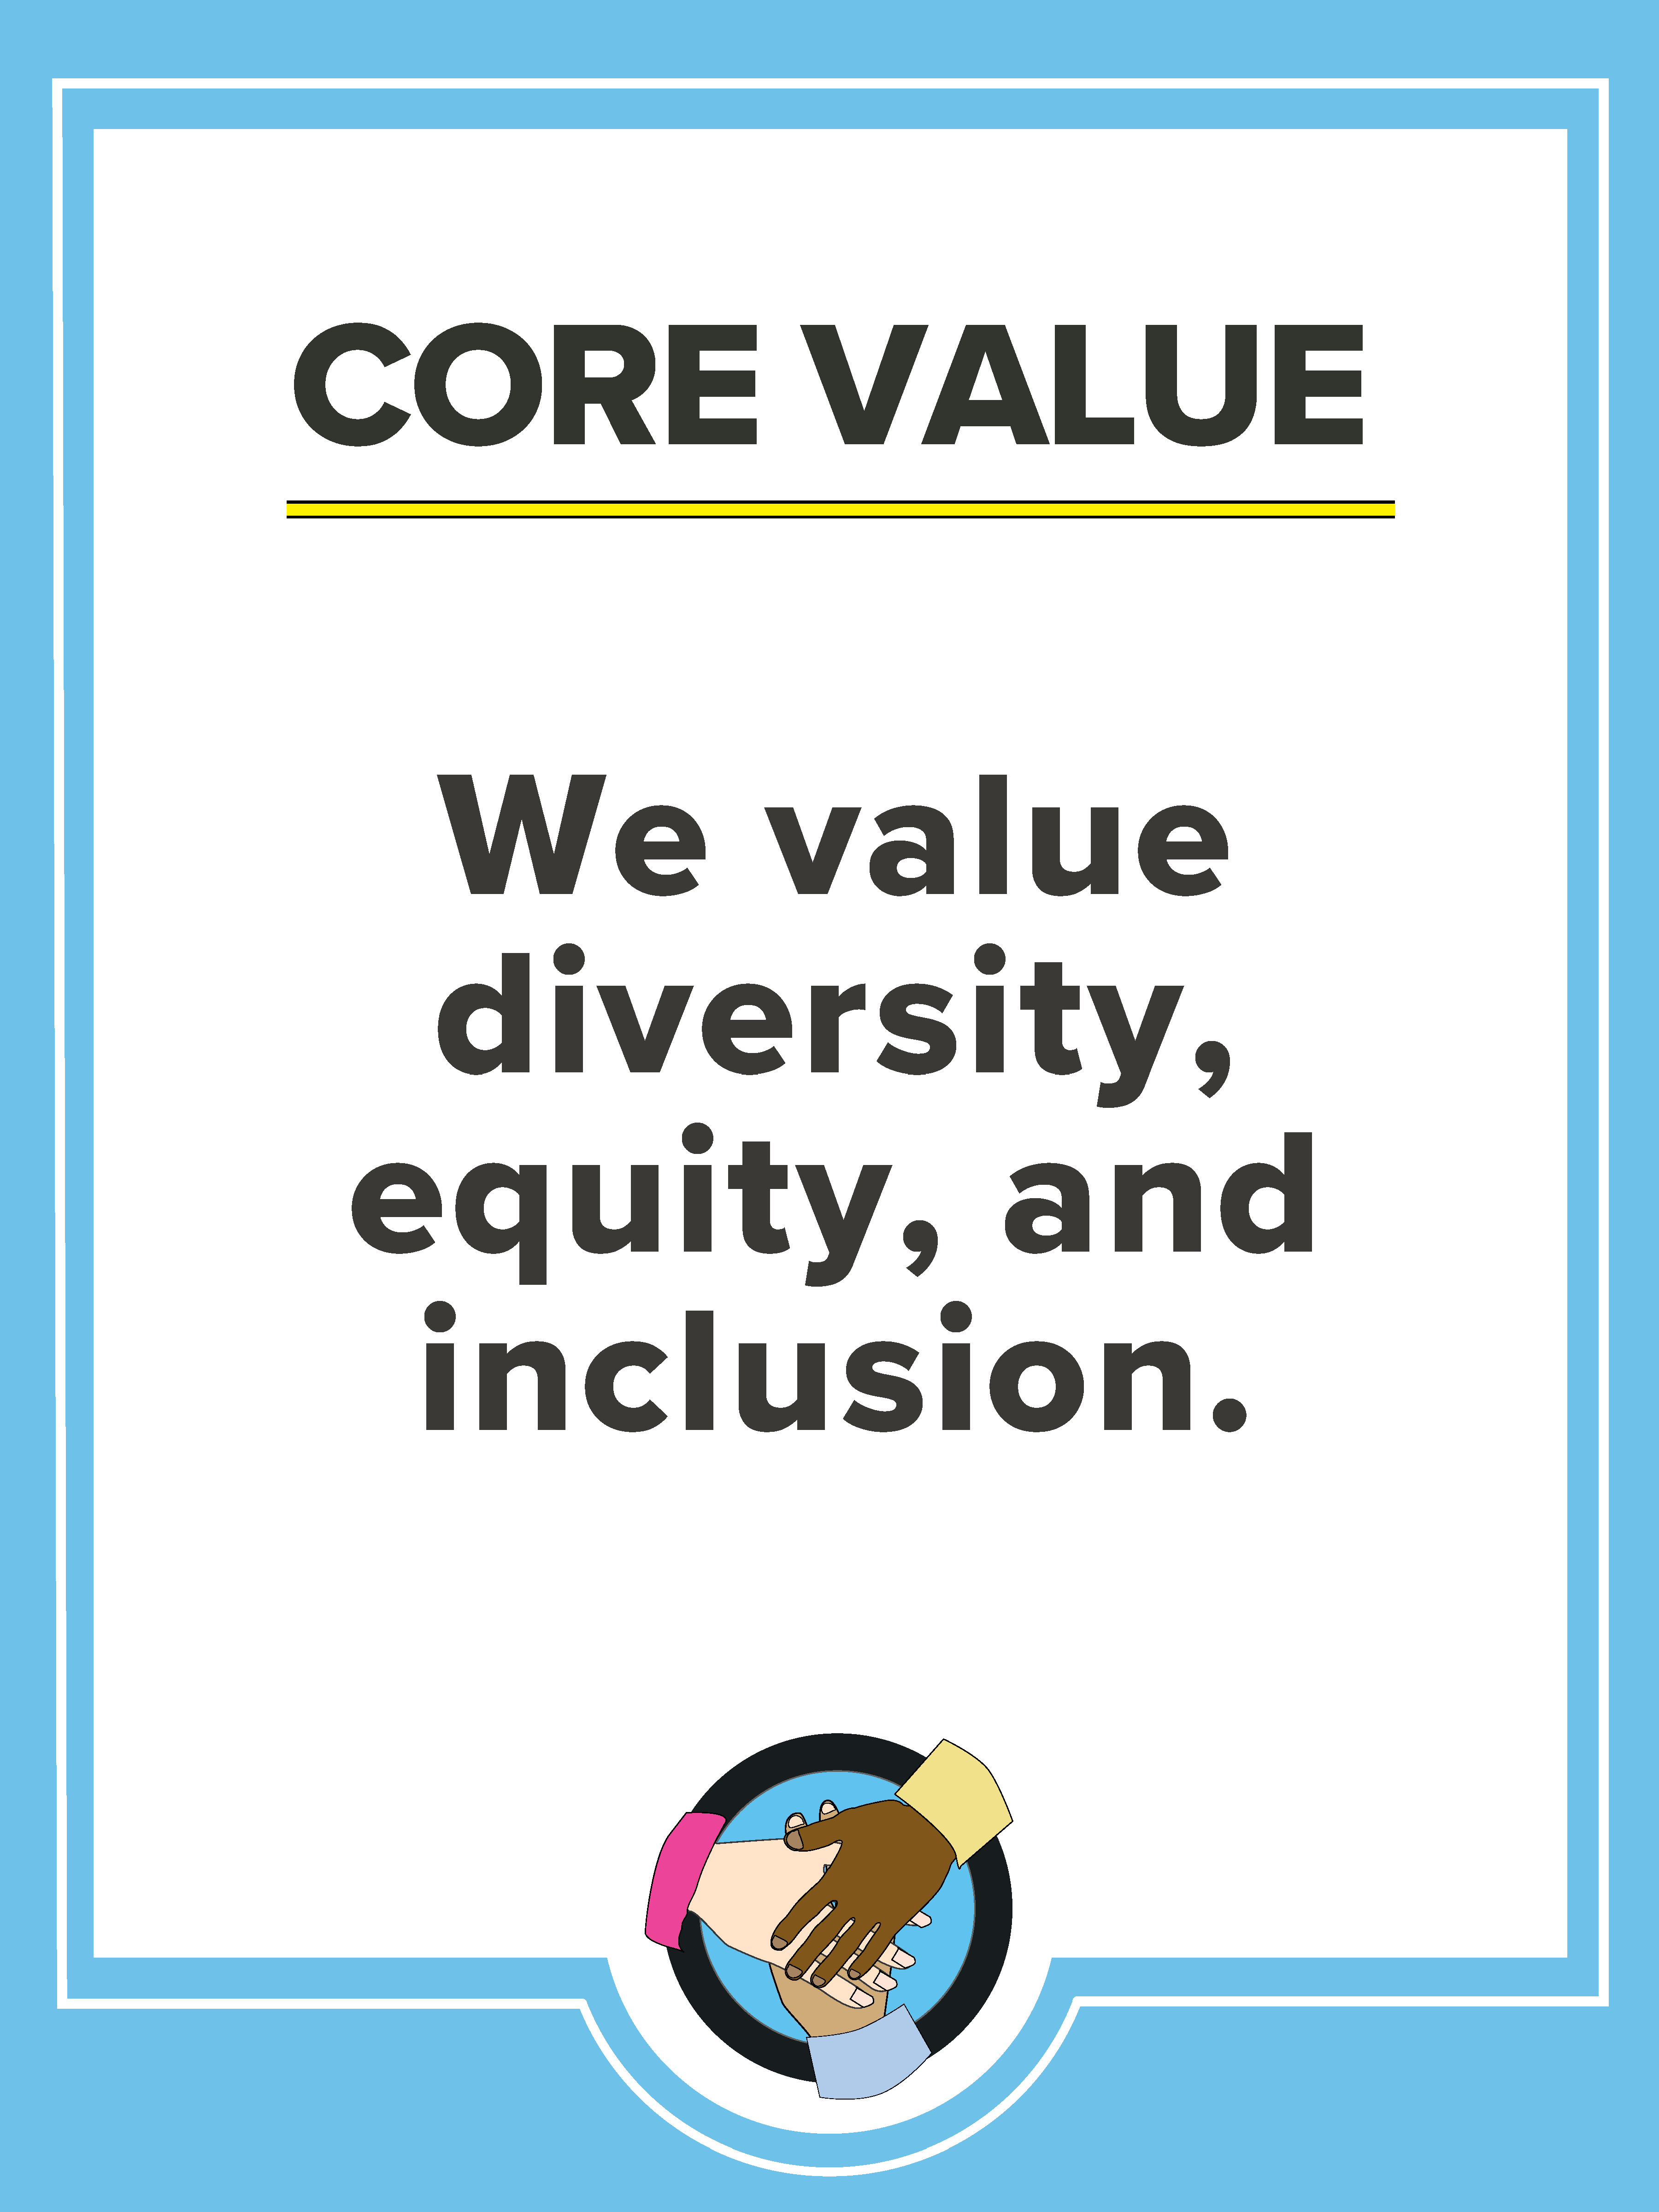 NUSD Core Value: We value diversity, equity, and inclusion.